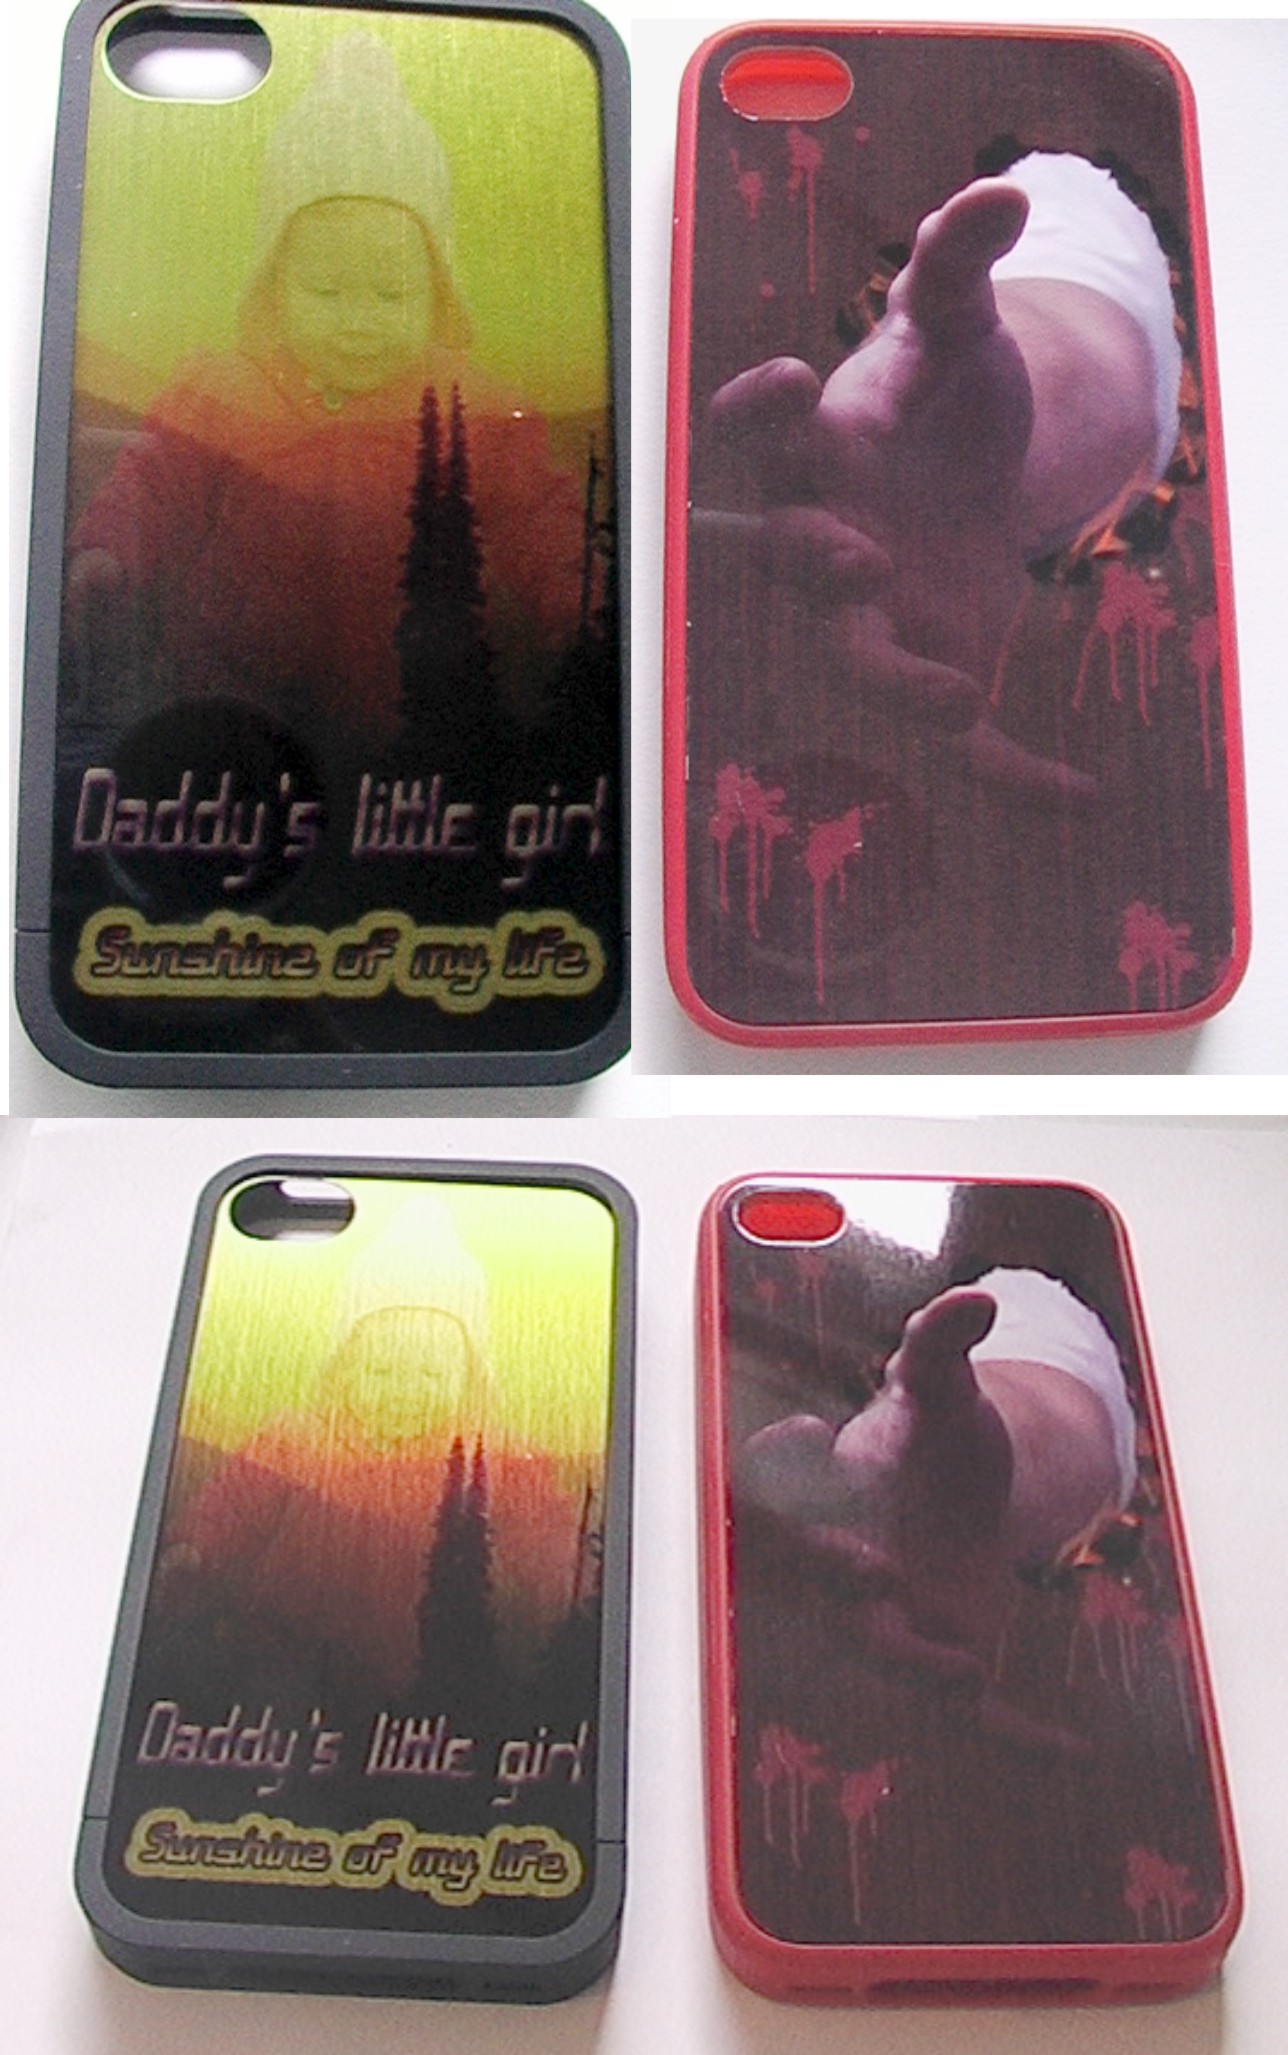 I-Phone covers made with sublimation printing